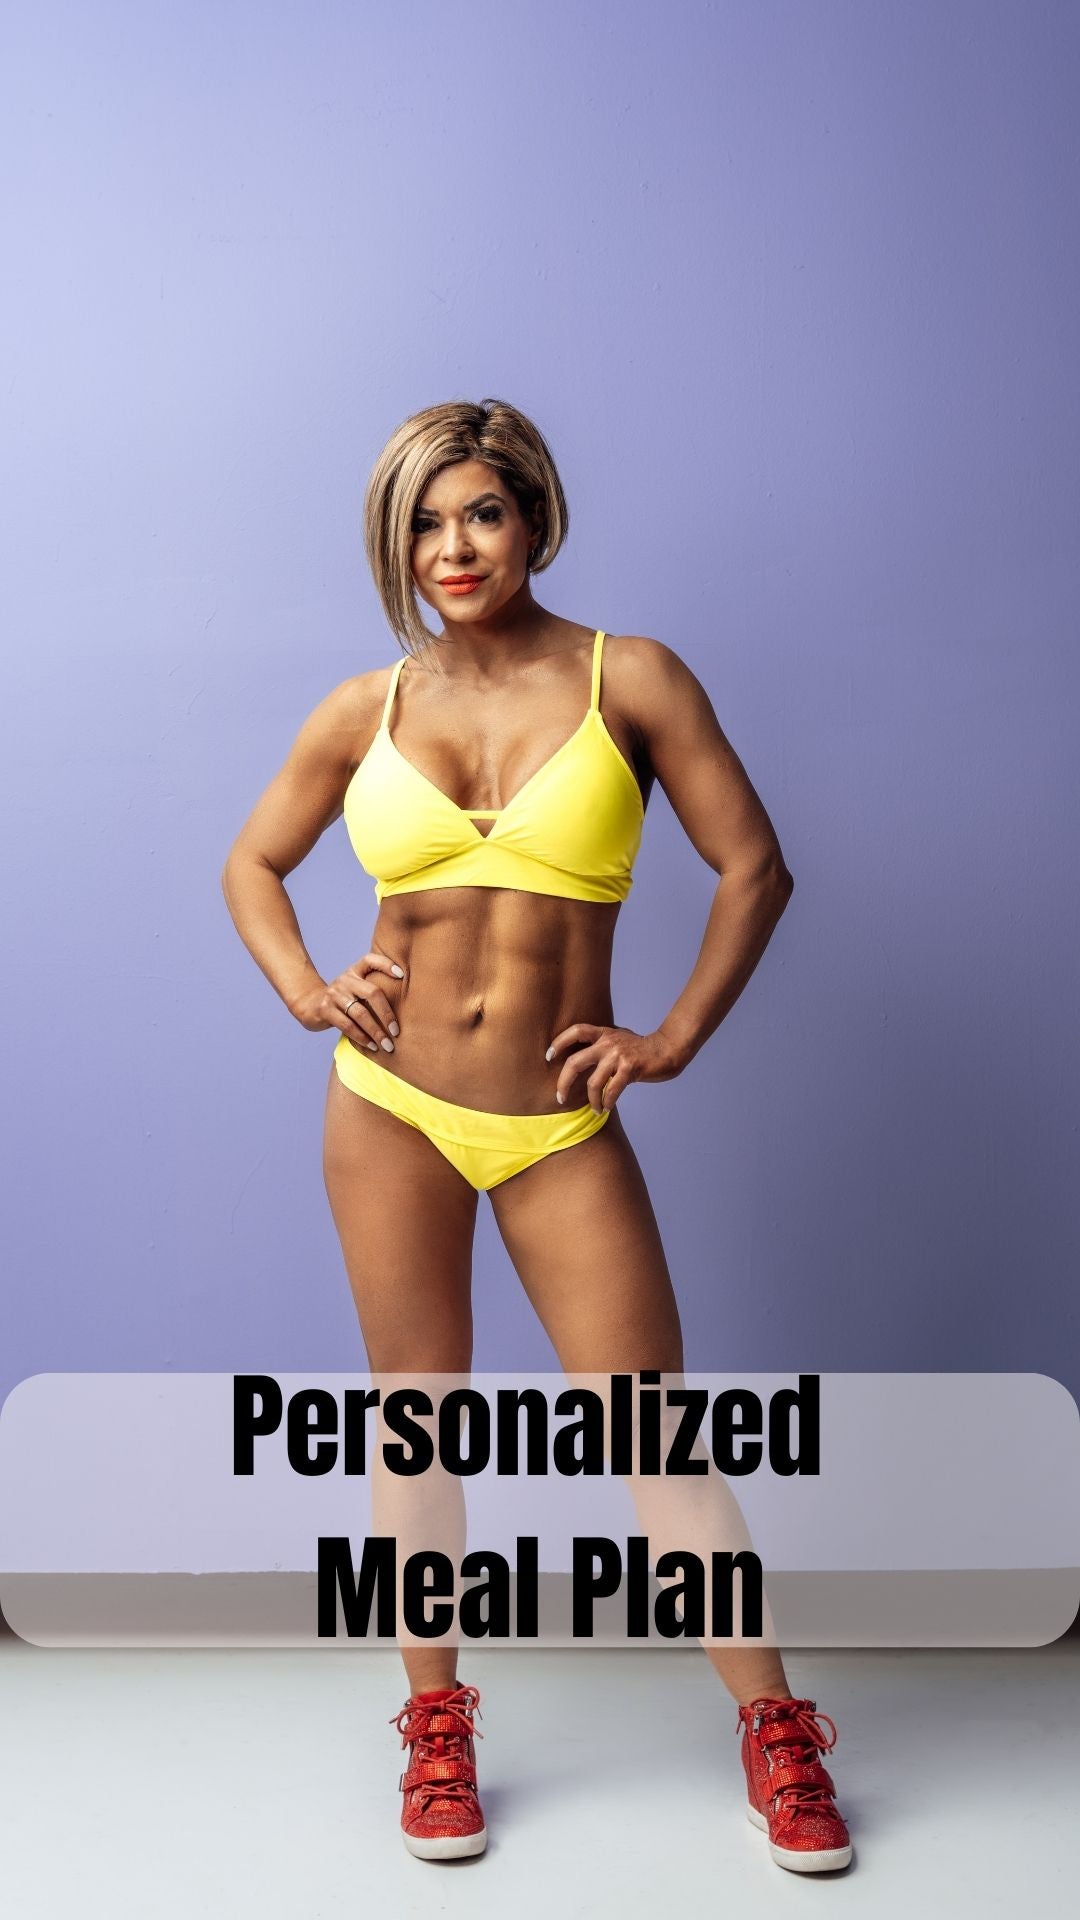 Personalized Nutrition Plan